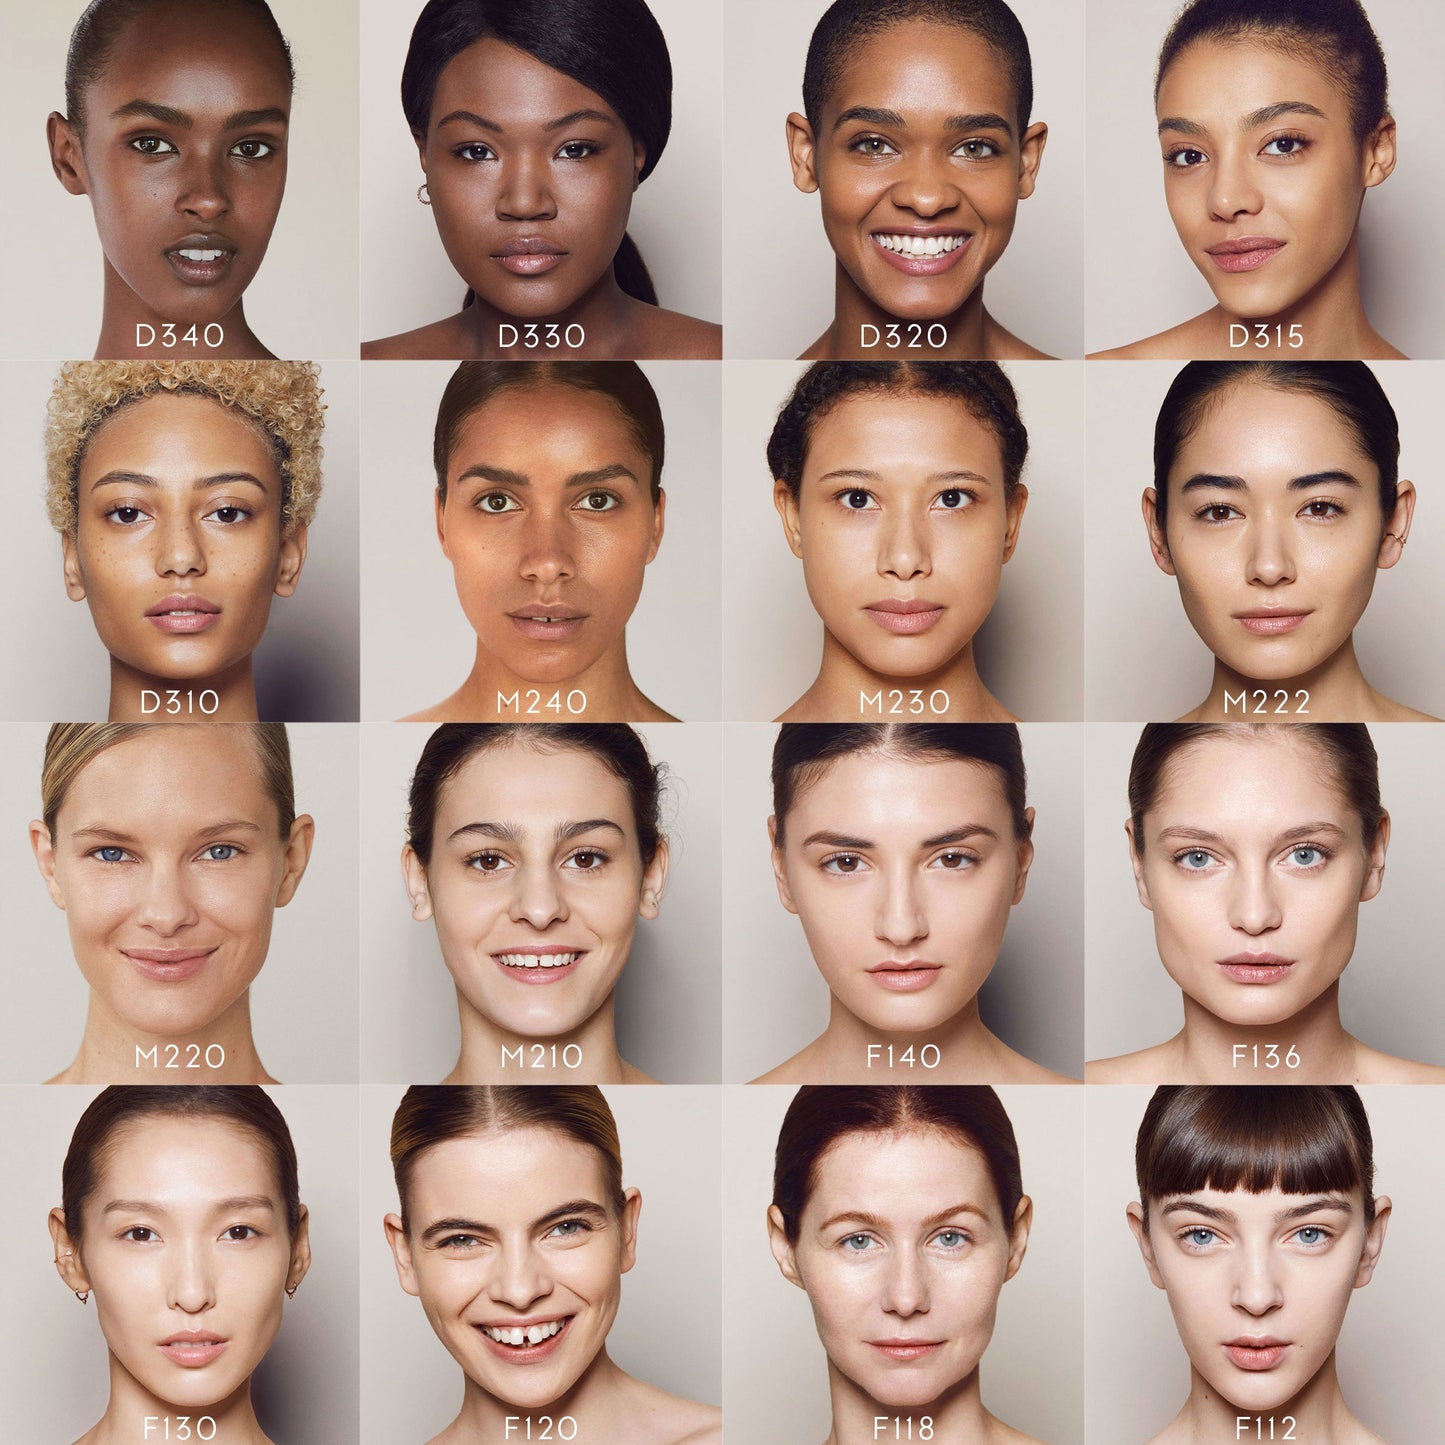 Close ups of various faces of different skin tones, from dark to light with the foundation shades they are wearing. F120 is the third-lightest shade shown. 